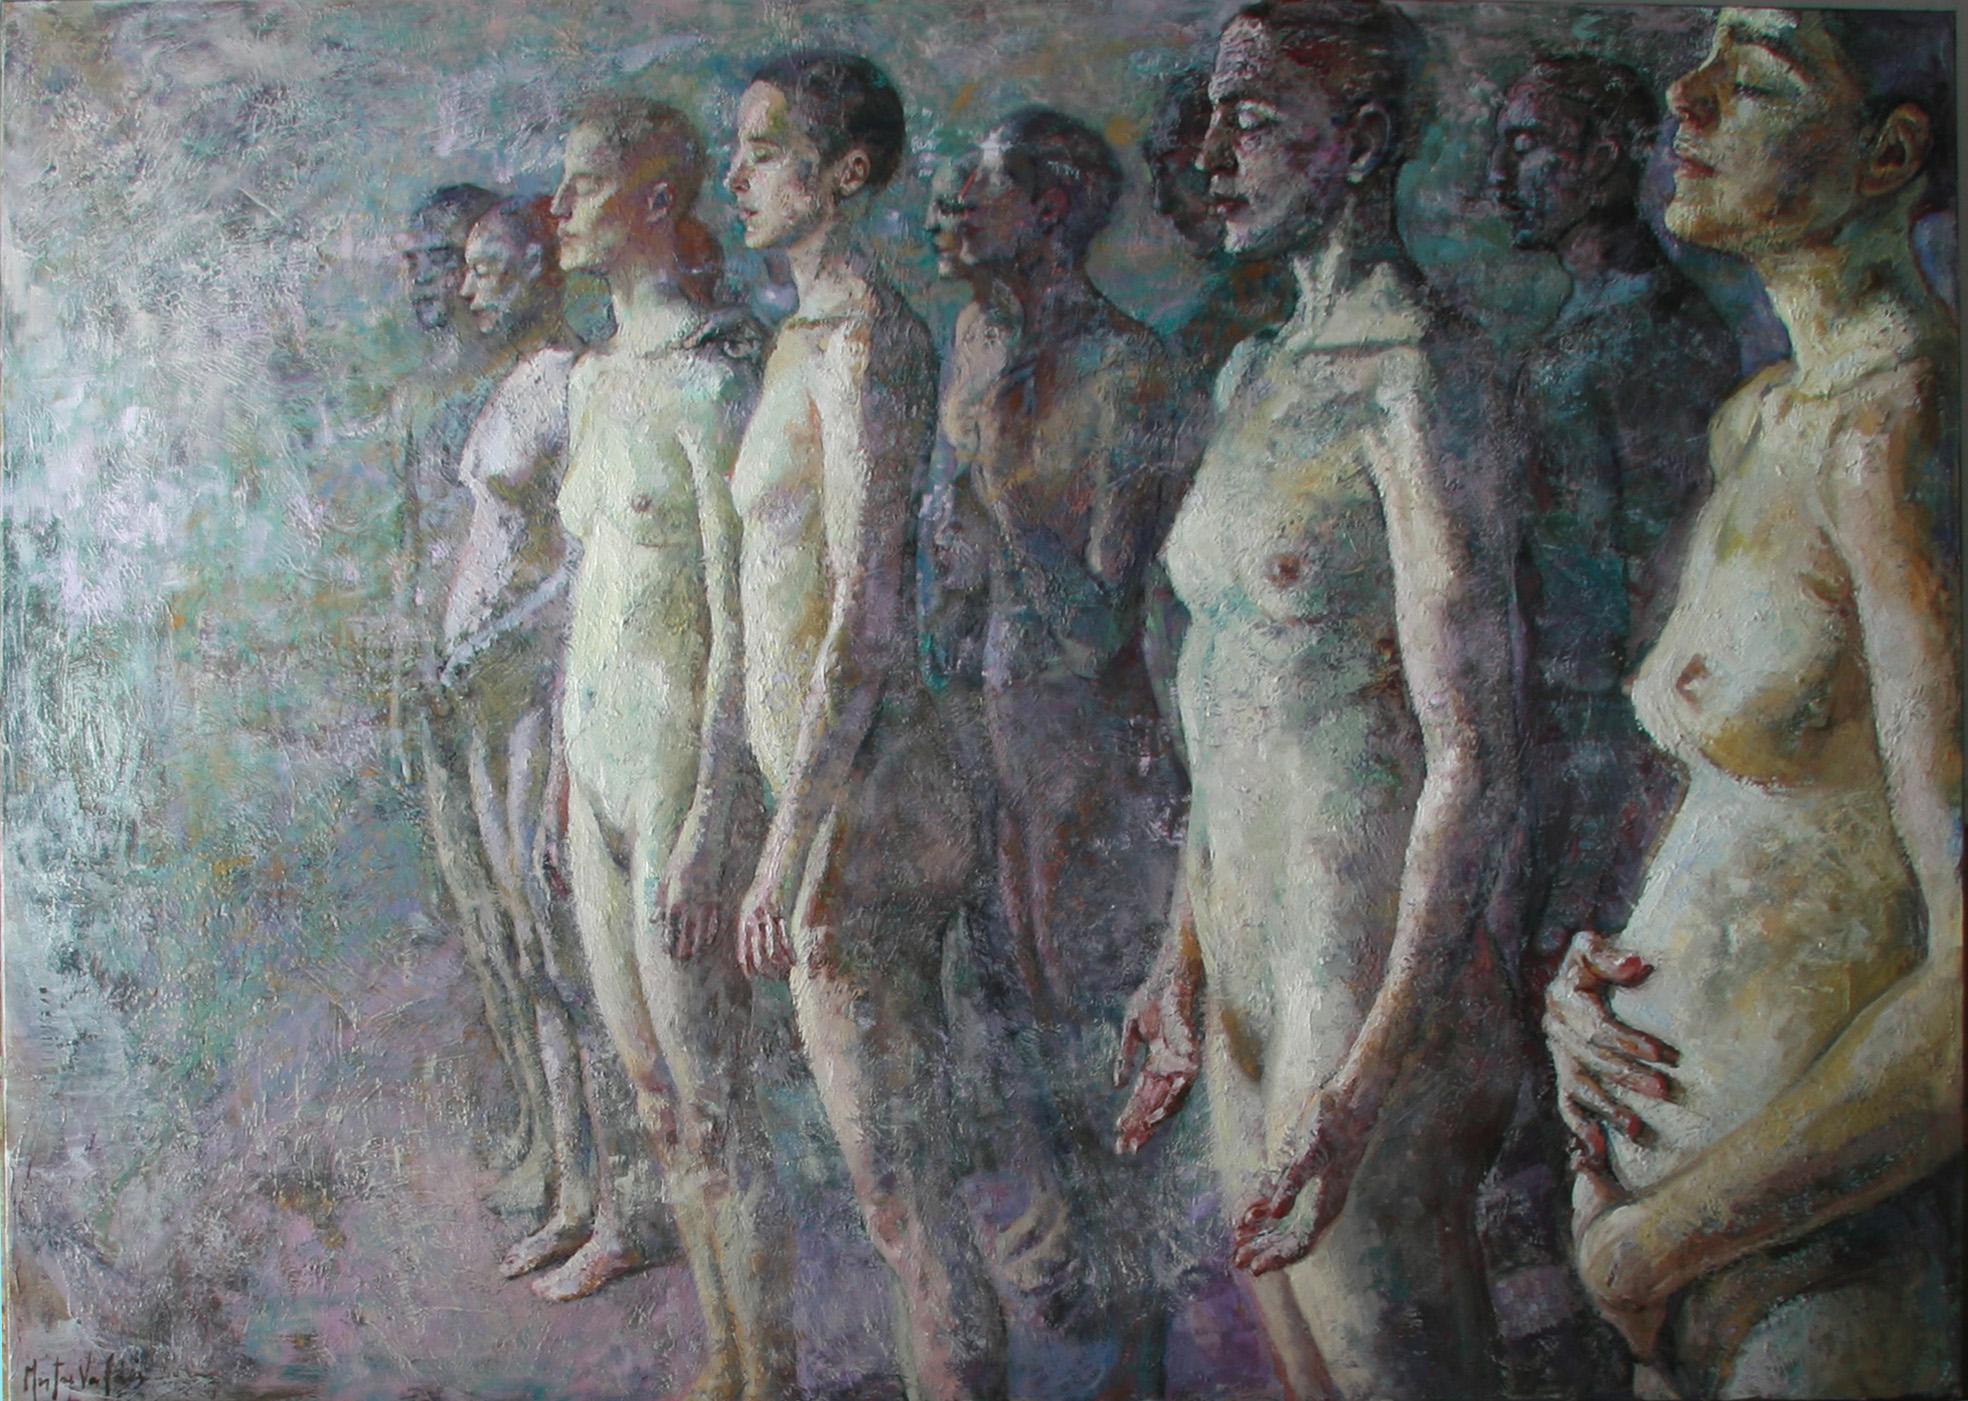 10-11-9 - 21st Century, Contemporary, Nude Painting, Oil on Canvas